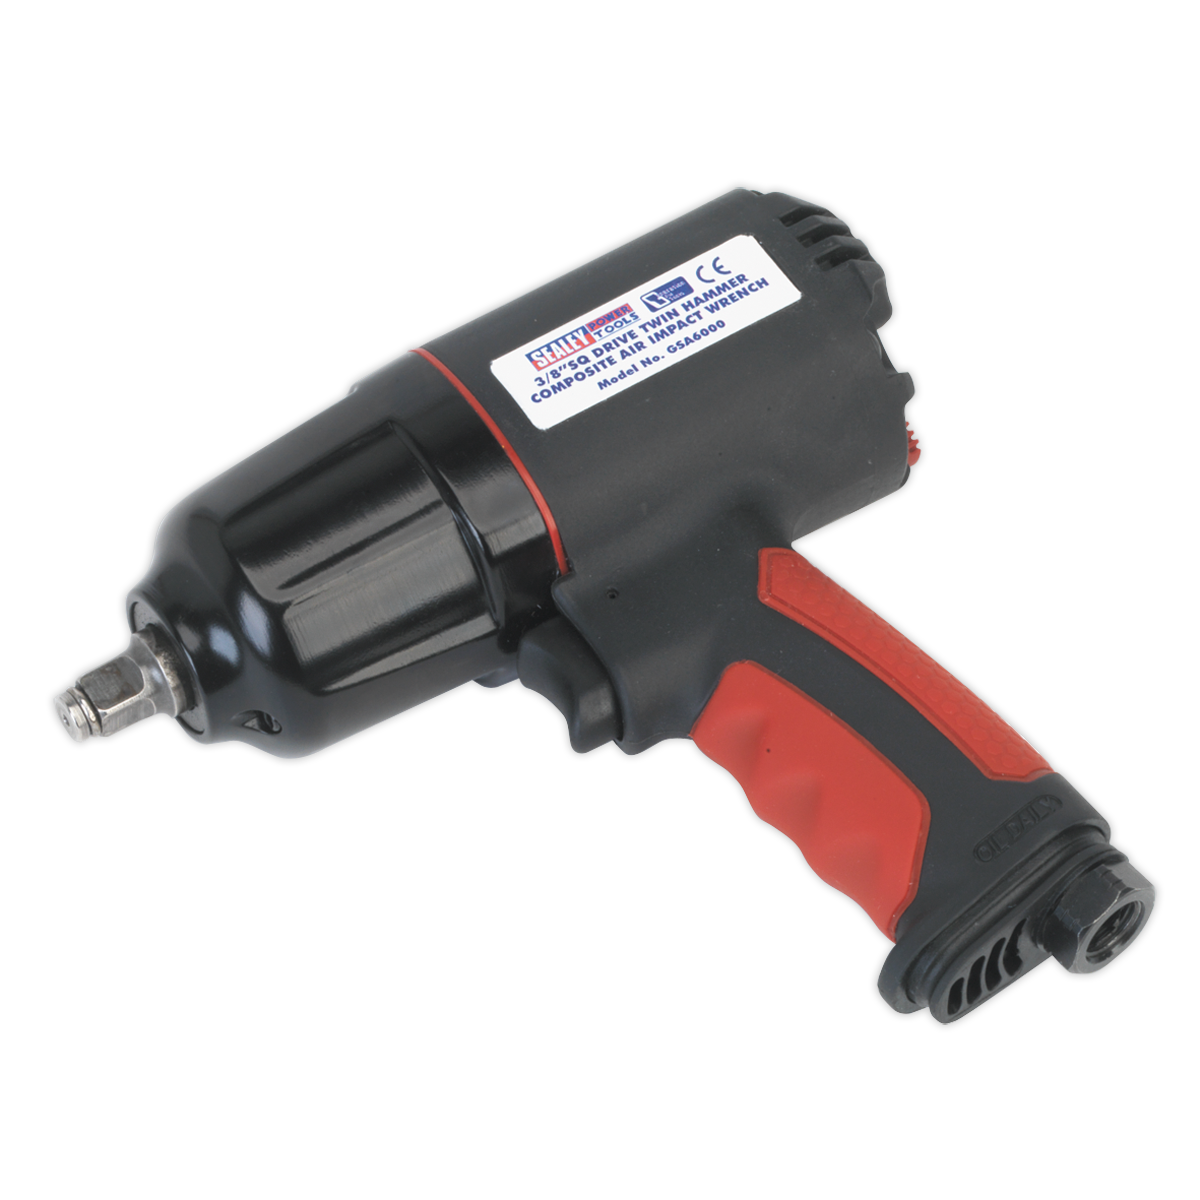 SEALEY - GSA6000 Composite Air Impact Wrench 3/8"Sq Drive - Twin Hammer